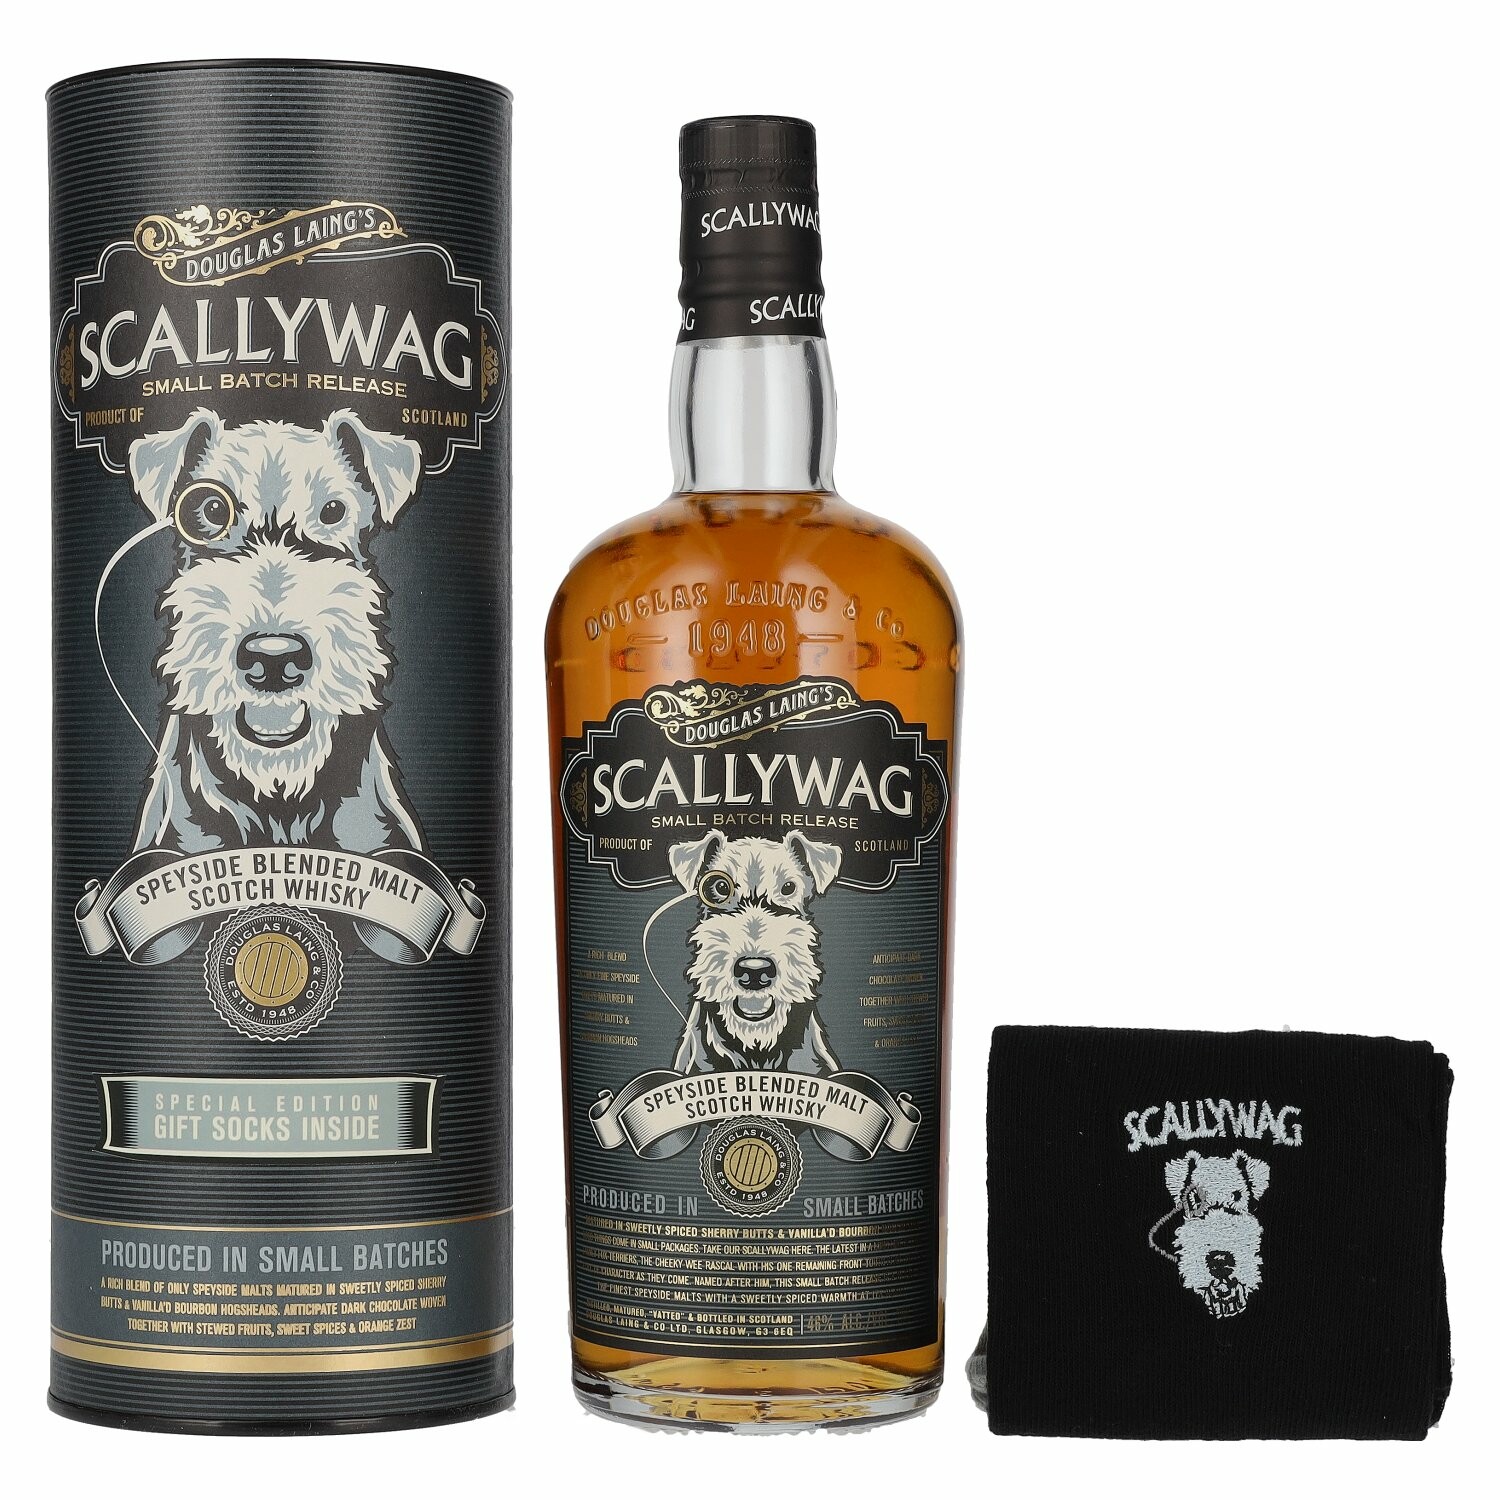 Douglas Laing SCALLYWAG Speyside Special Edition 46% Vol. 0,7l in Giftbox with Socken